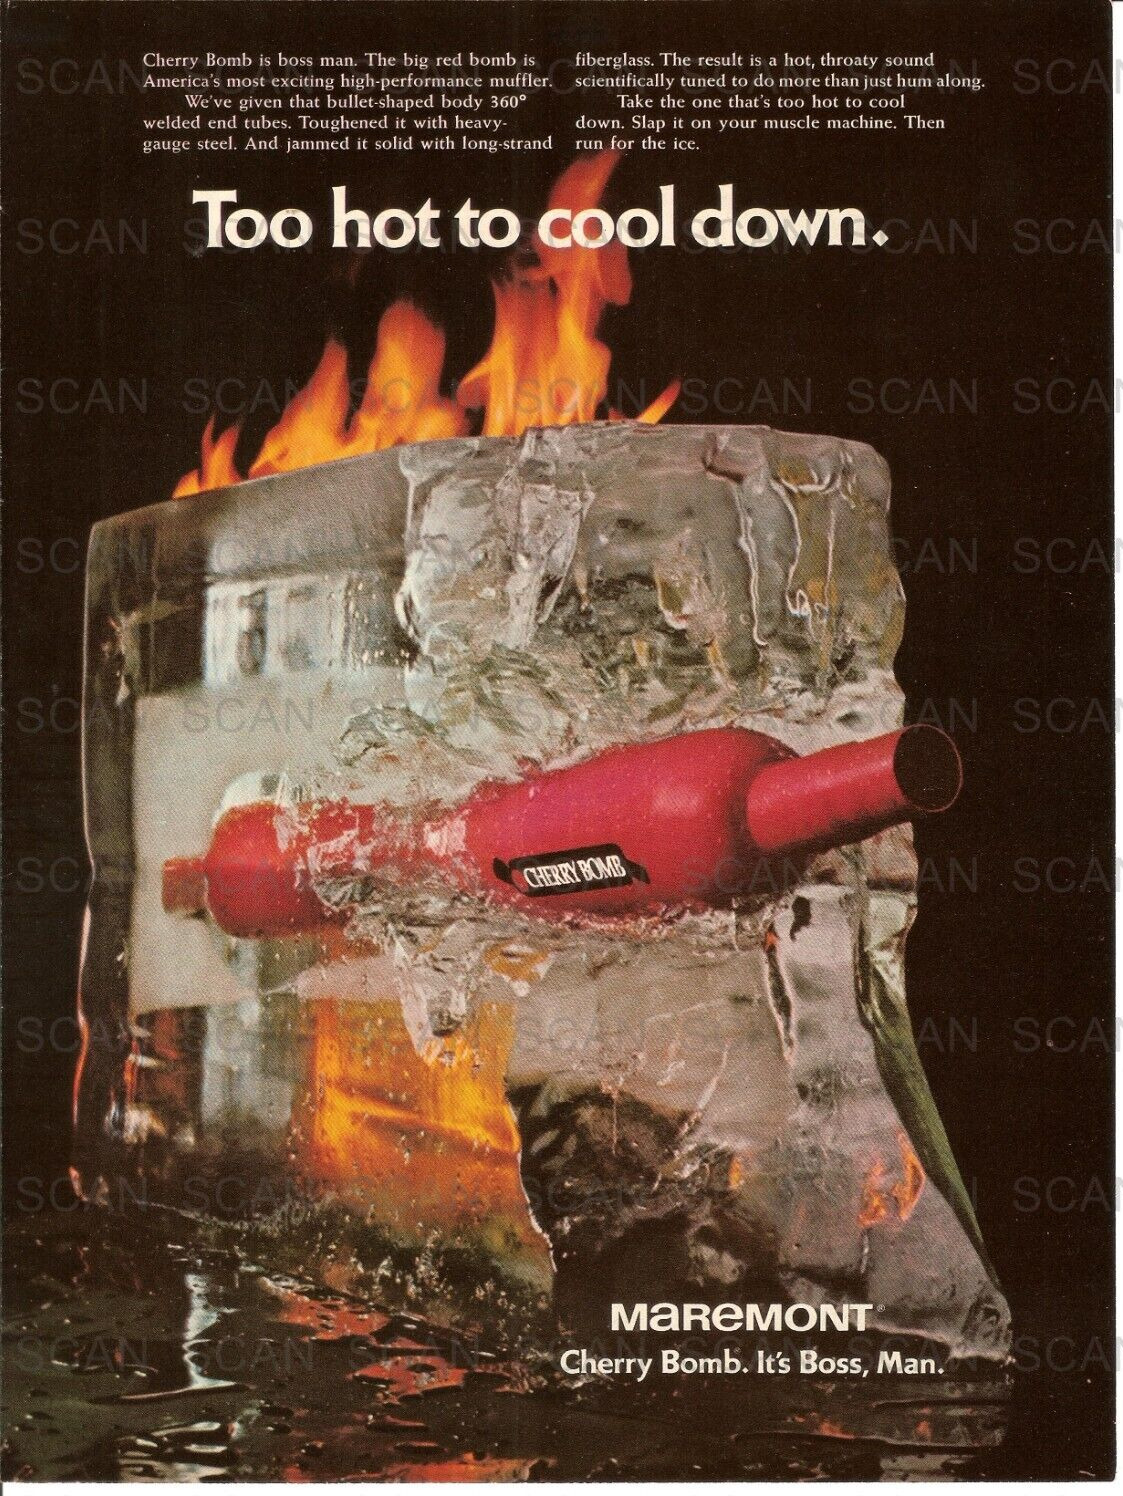 1971 Maremont Cherry Bomb Muffler Vintage Magazine Ad  Too Hot to Cool Down